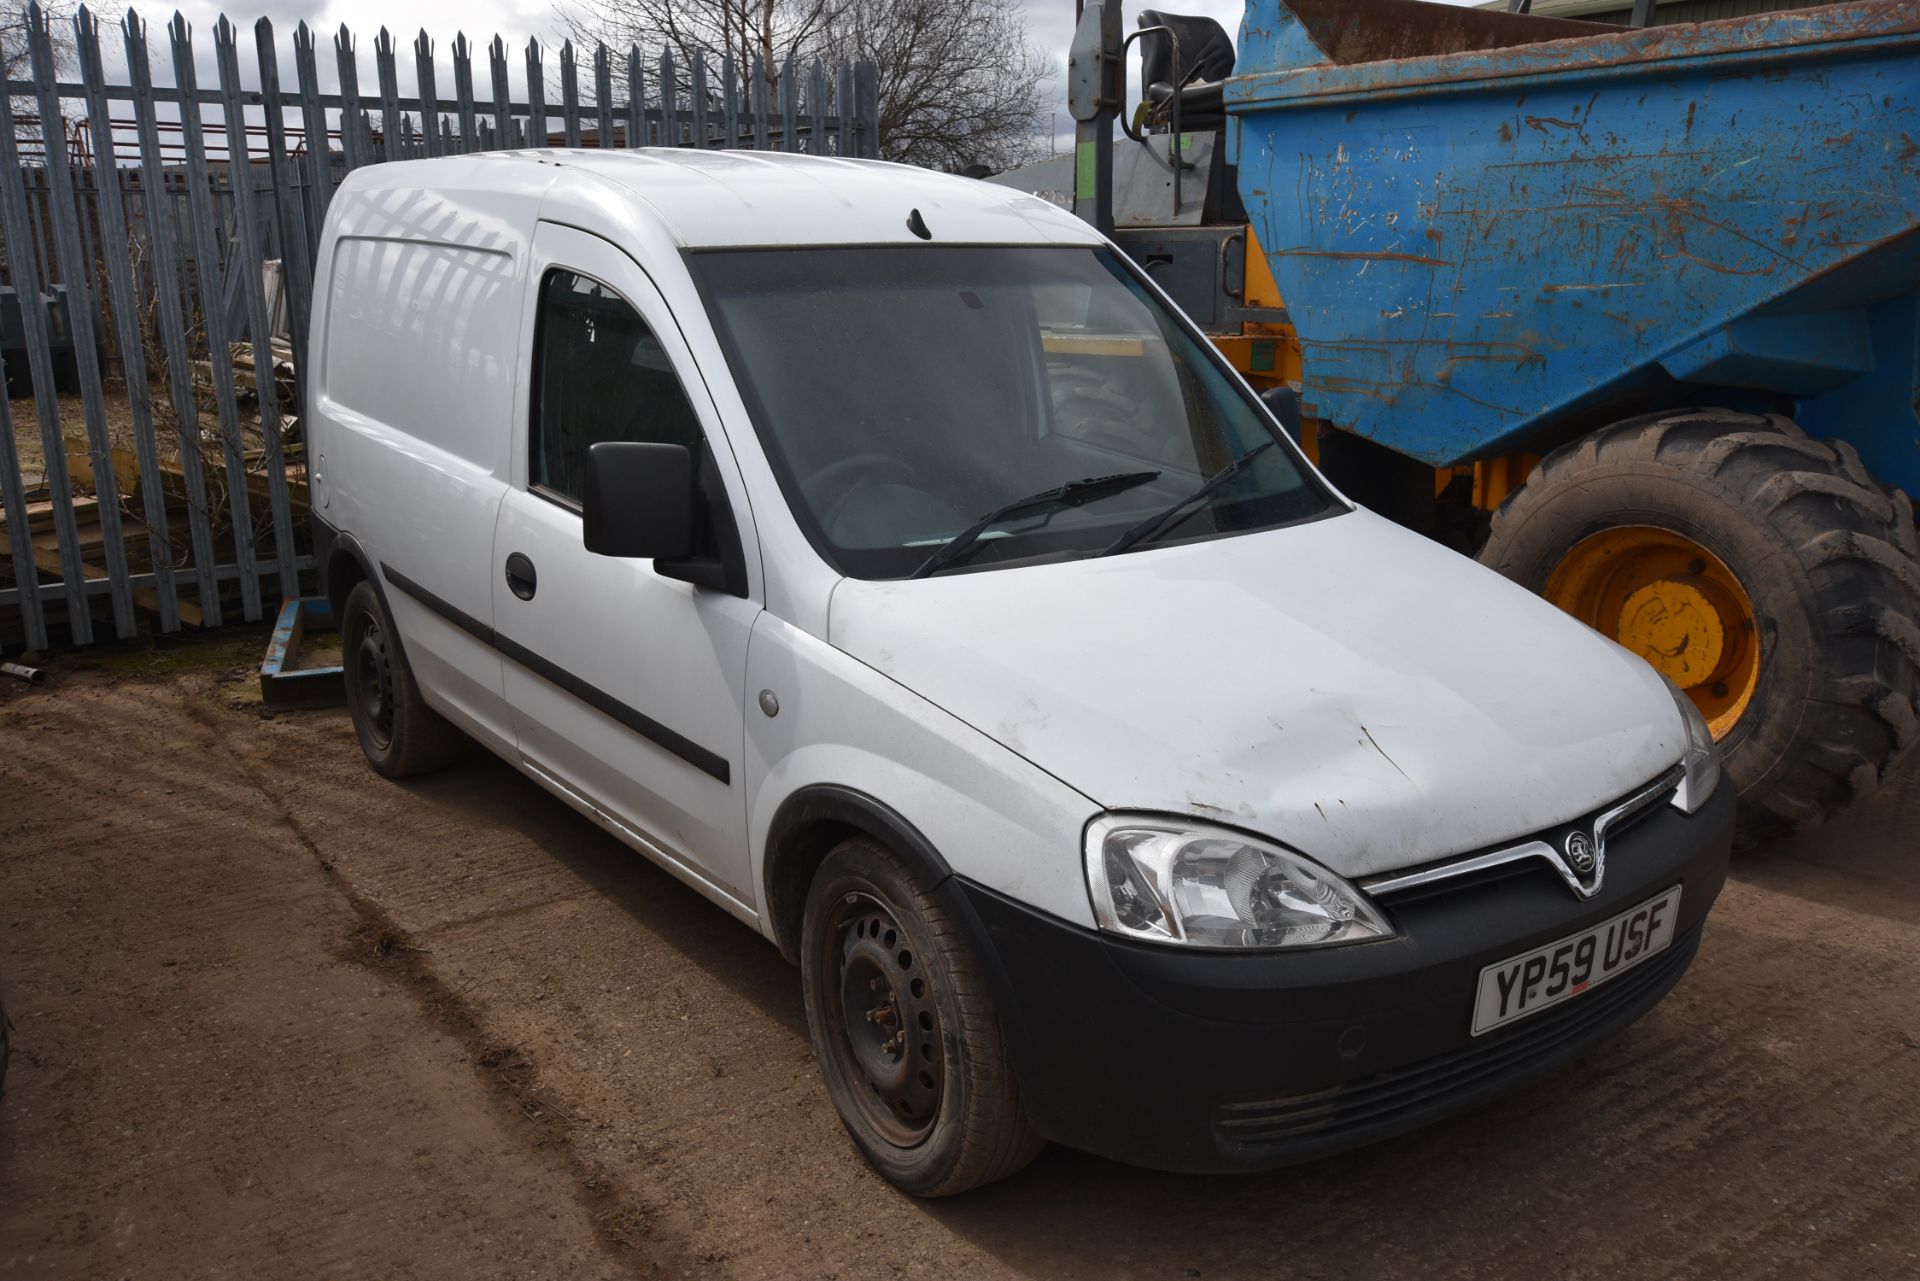 Vauxhall Combo 1.7CDTi Diesel Van, Registration Number: YP59USF, Date of Registration: - , Indicated